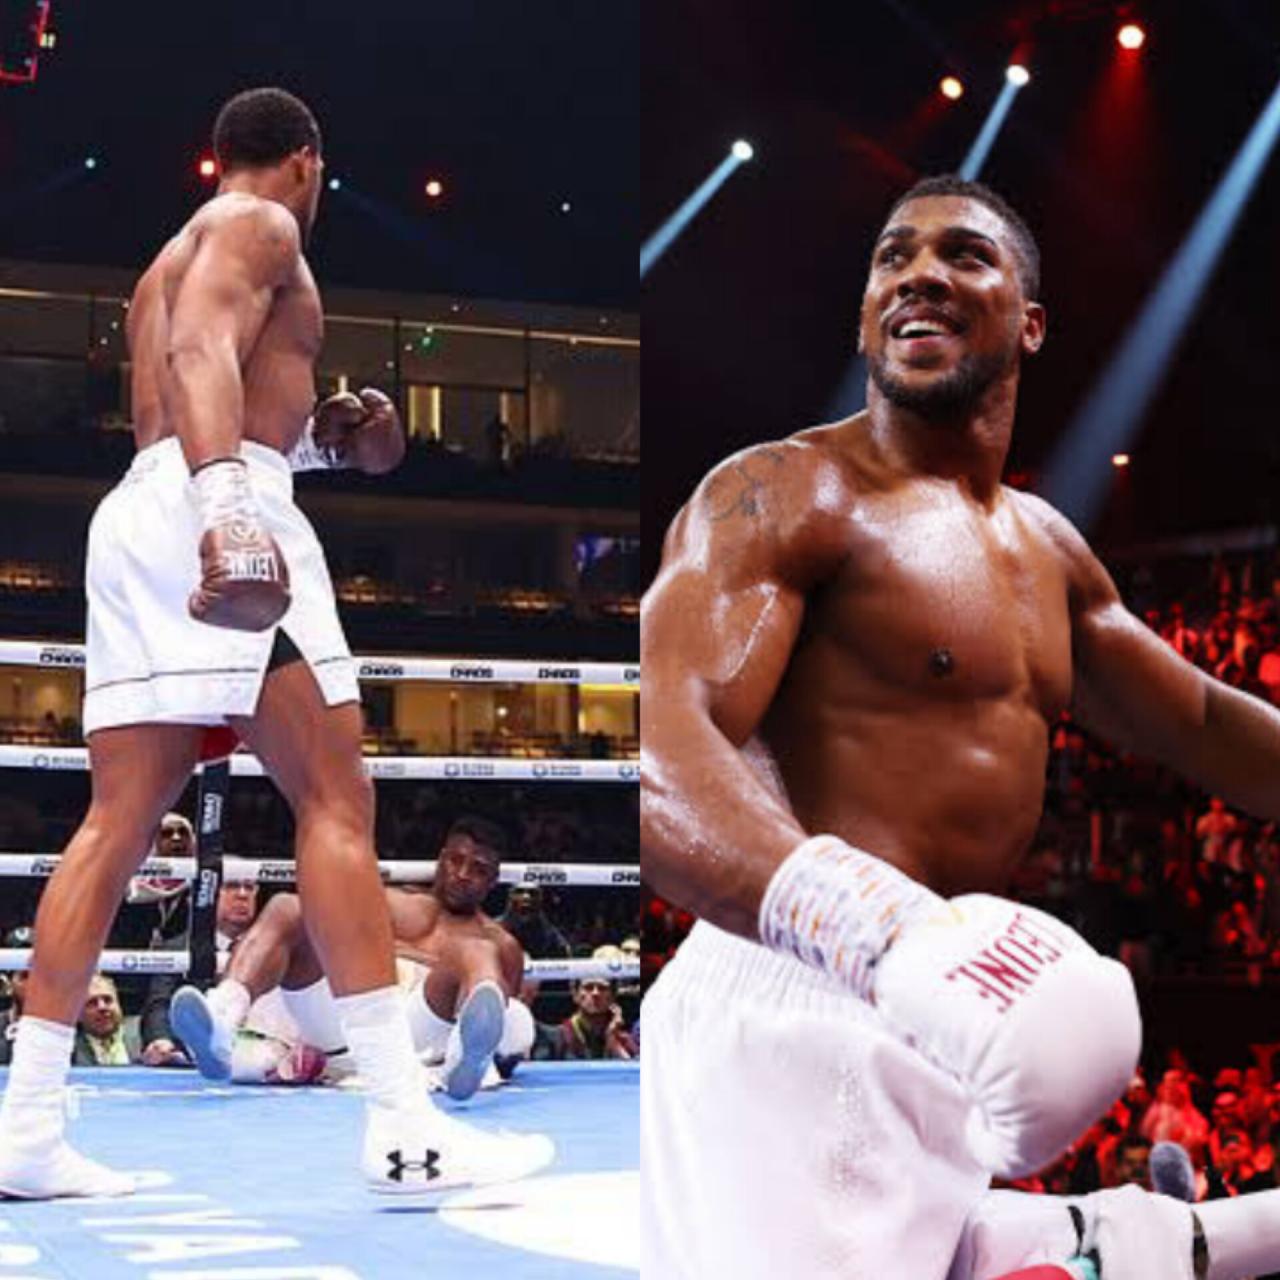 Anthony Joshua obliterates Francis Ngannou with brutal knock out in 2nd round (videos)